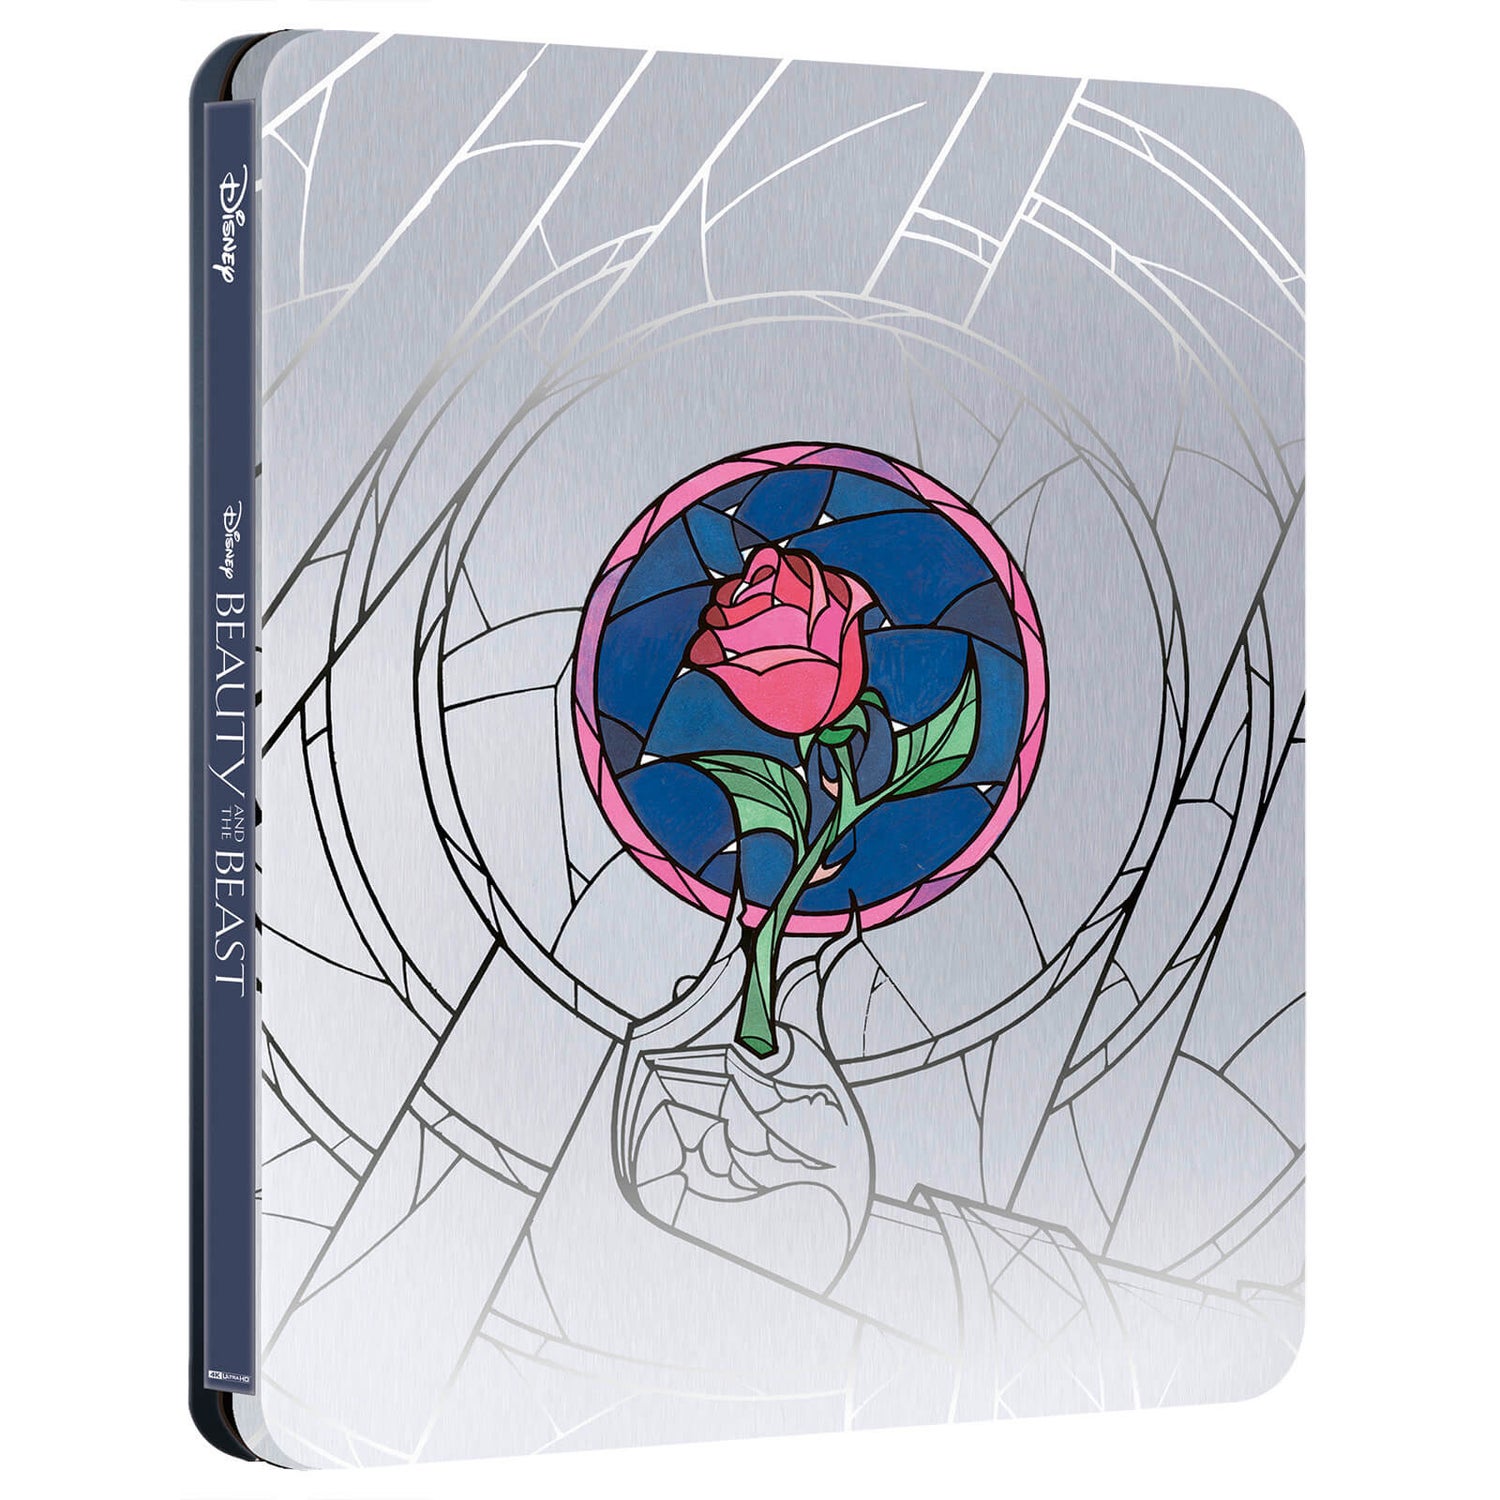 Disney's Beauty and the Beast (Animated) - Zavvi Exclusive 4K Ultra HD Steelbook (Includes Blu-ray)